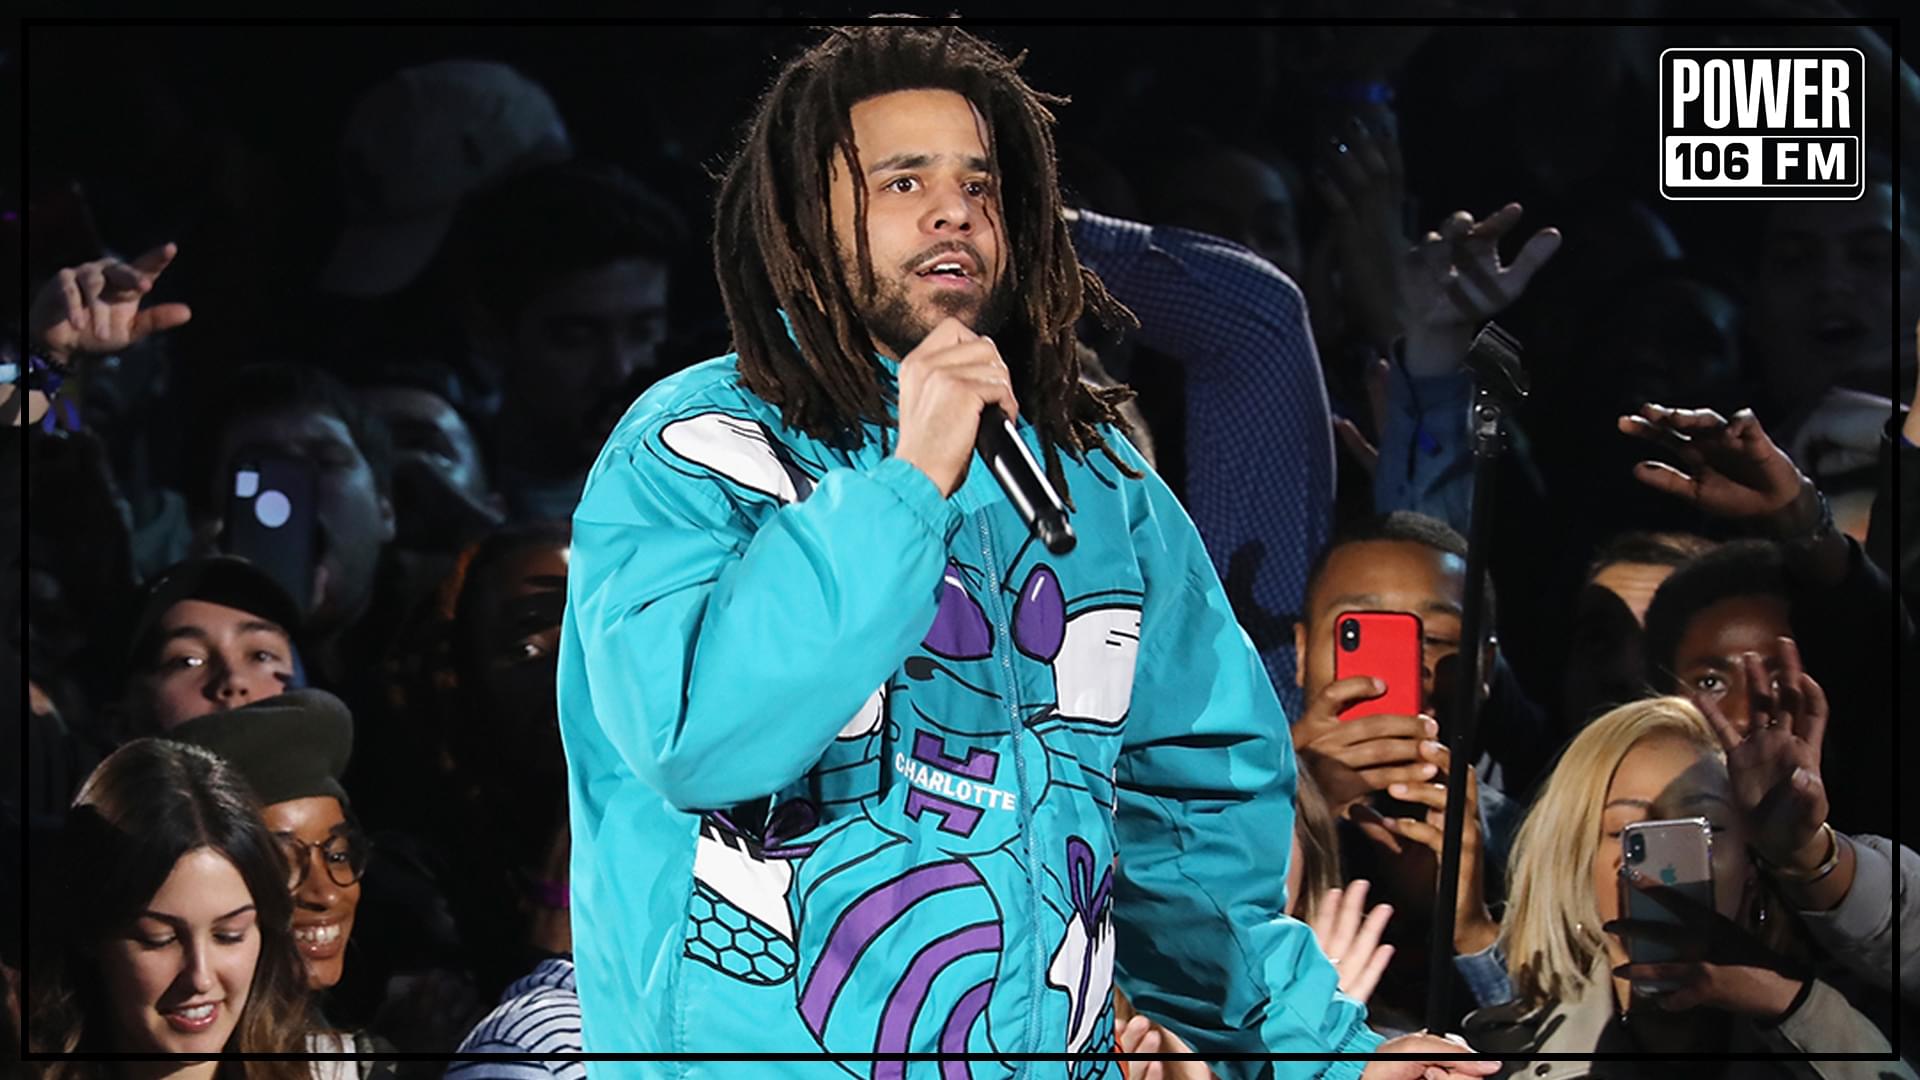 #DailyDose: Reactions To J. Cole’s GQ Shoot [WATCH]